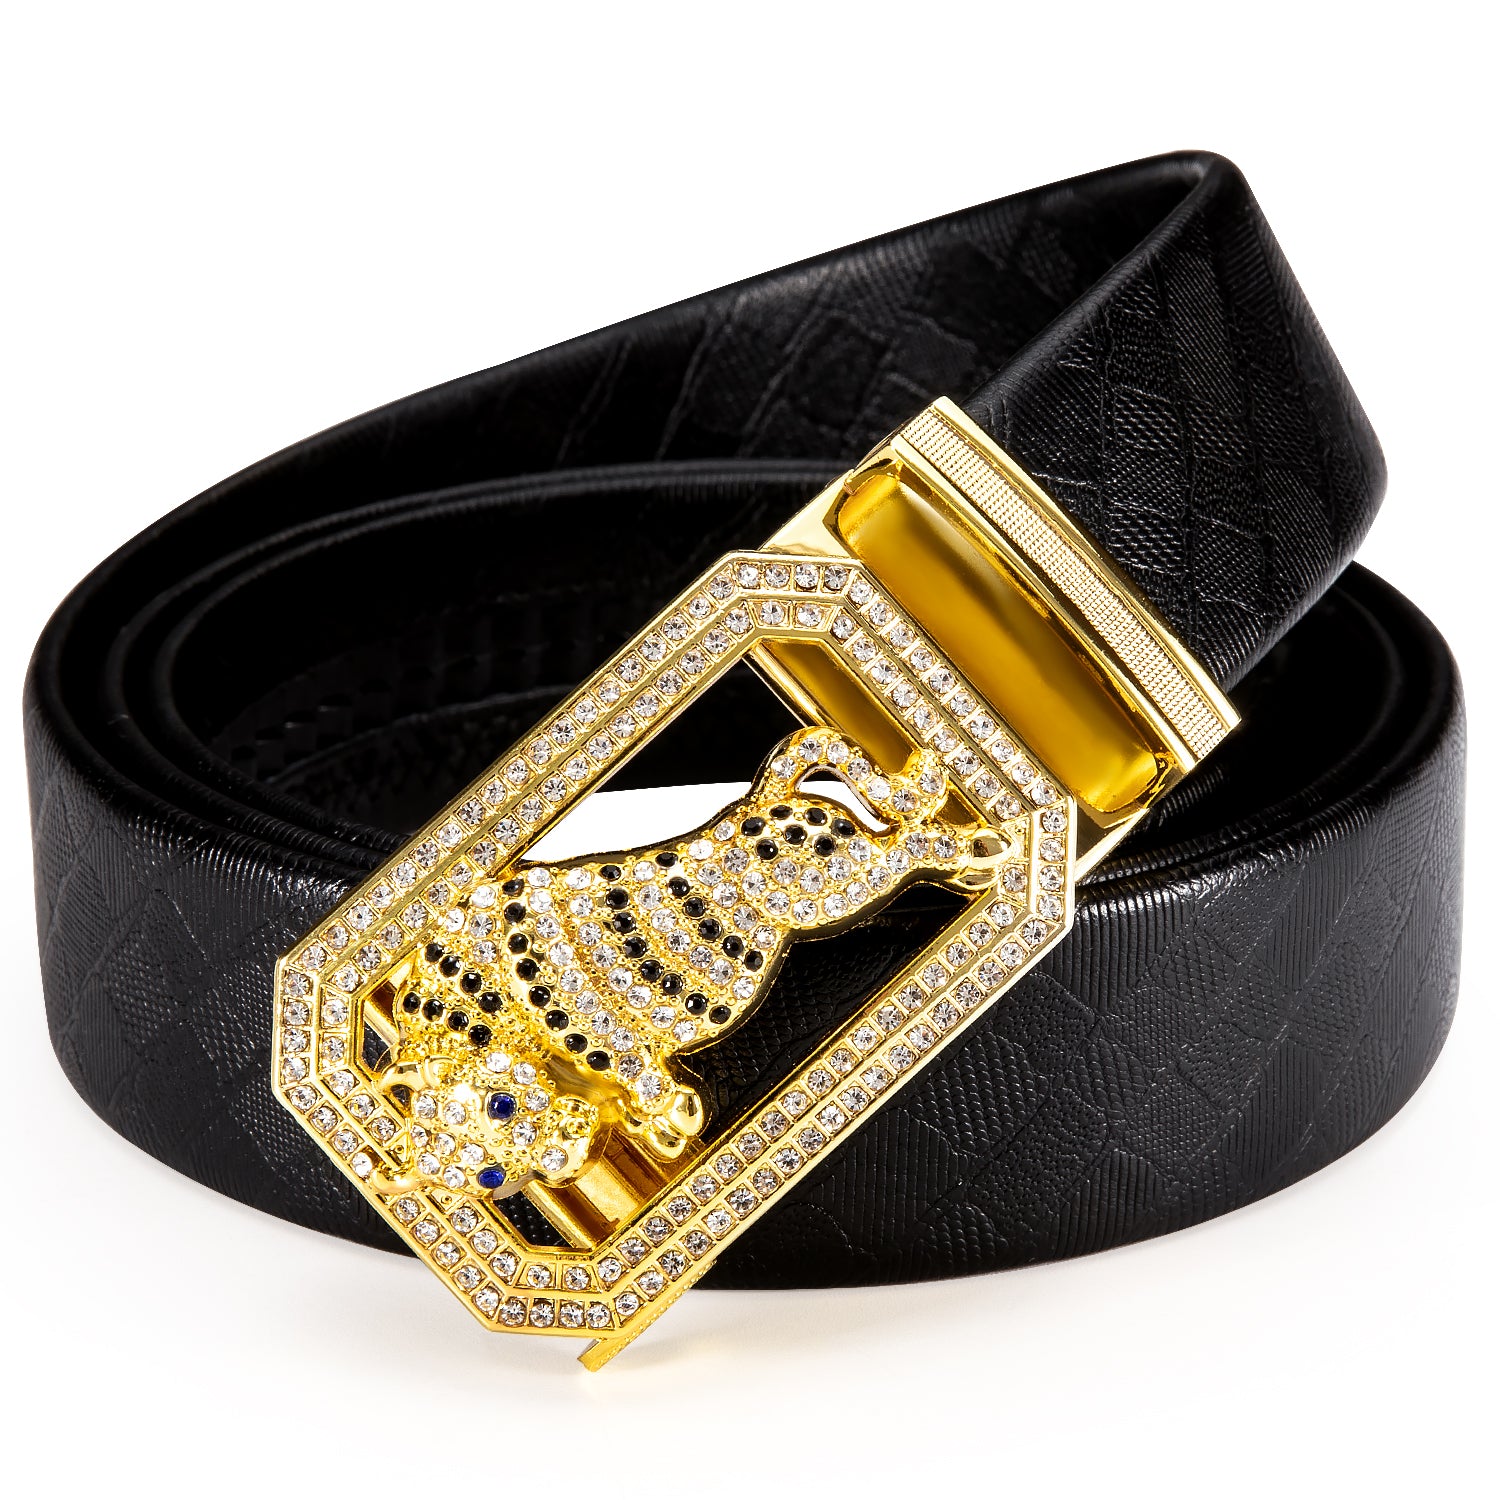 Novelty Golden Diamond Metal Automatic Buckle Black Leather Belt 43 inch to 63 inch